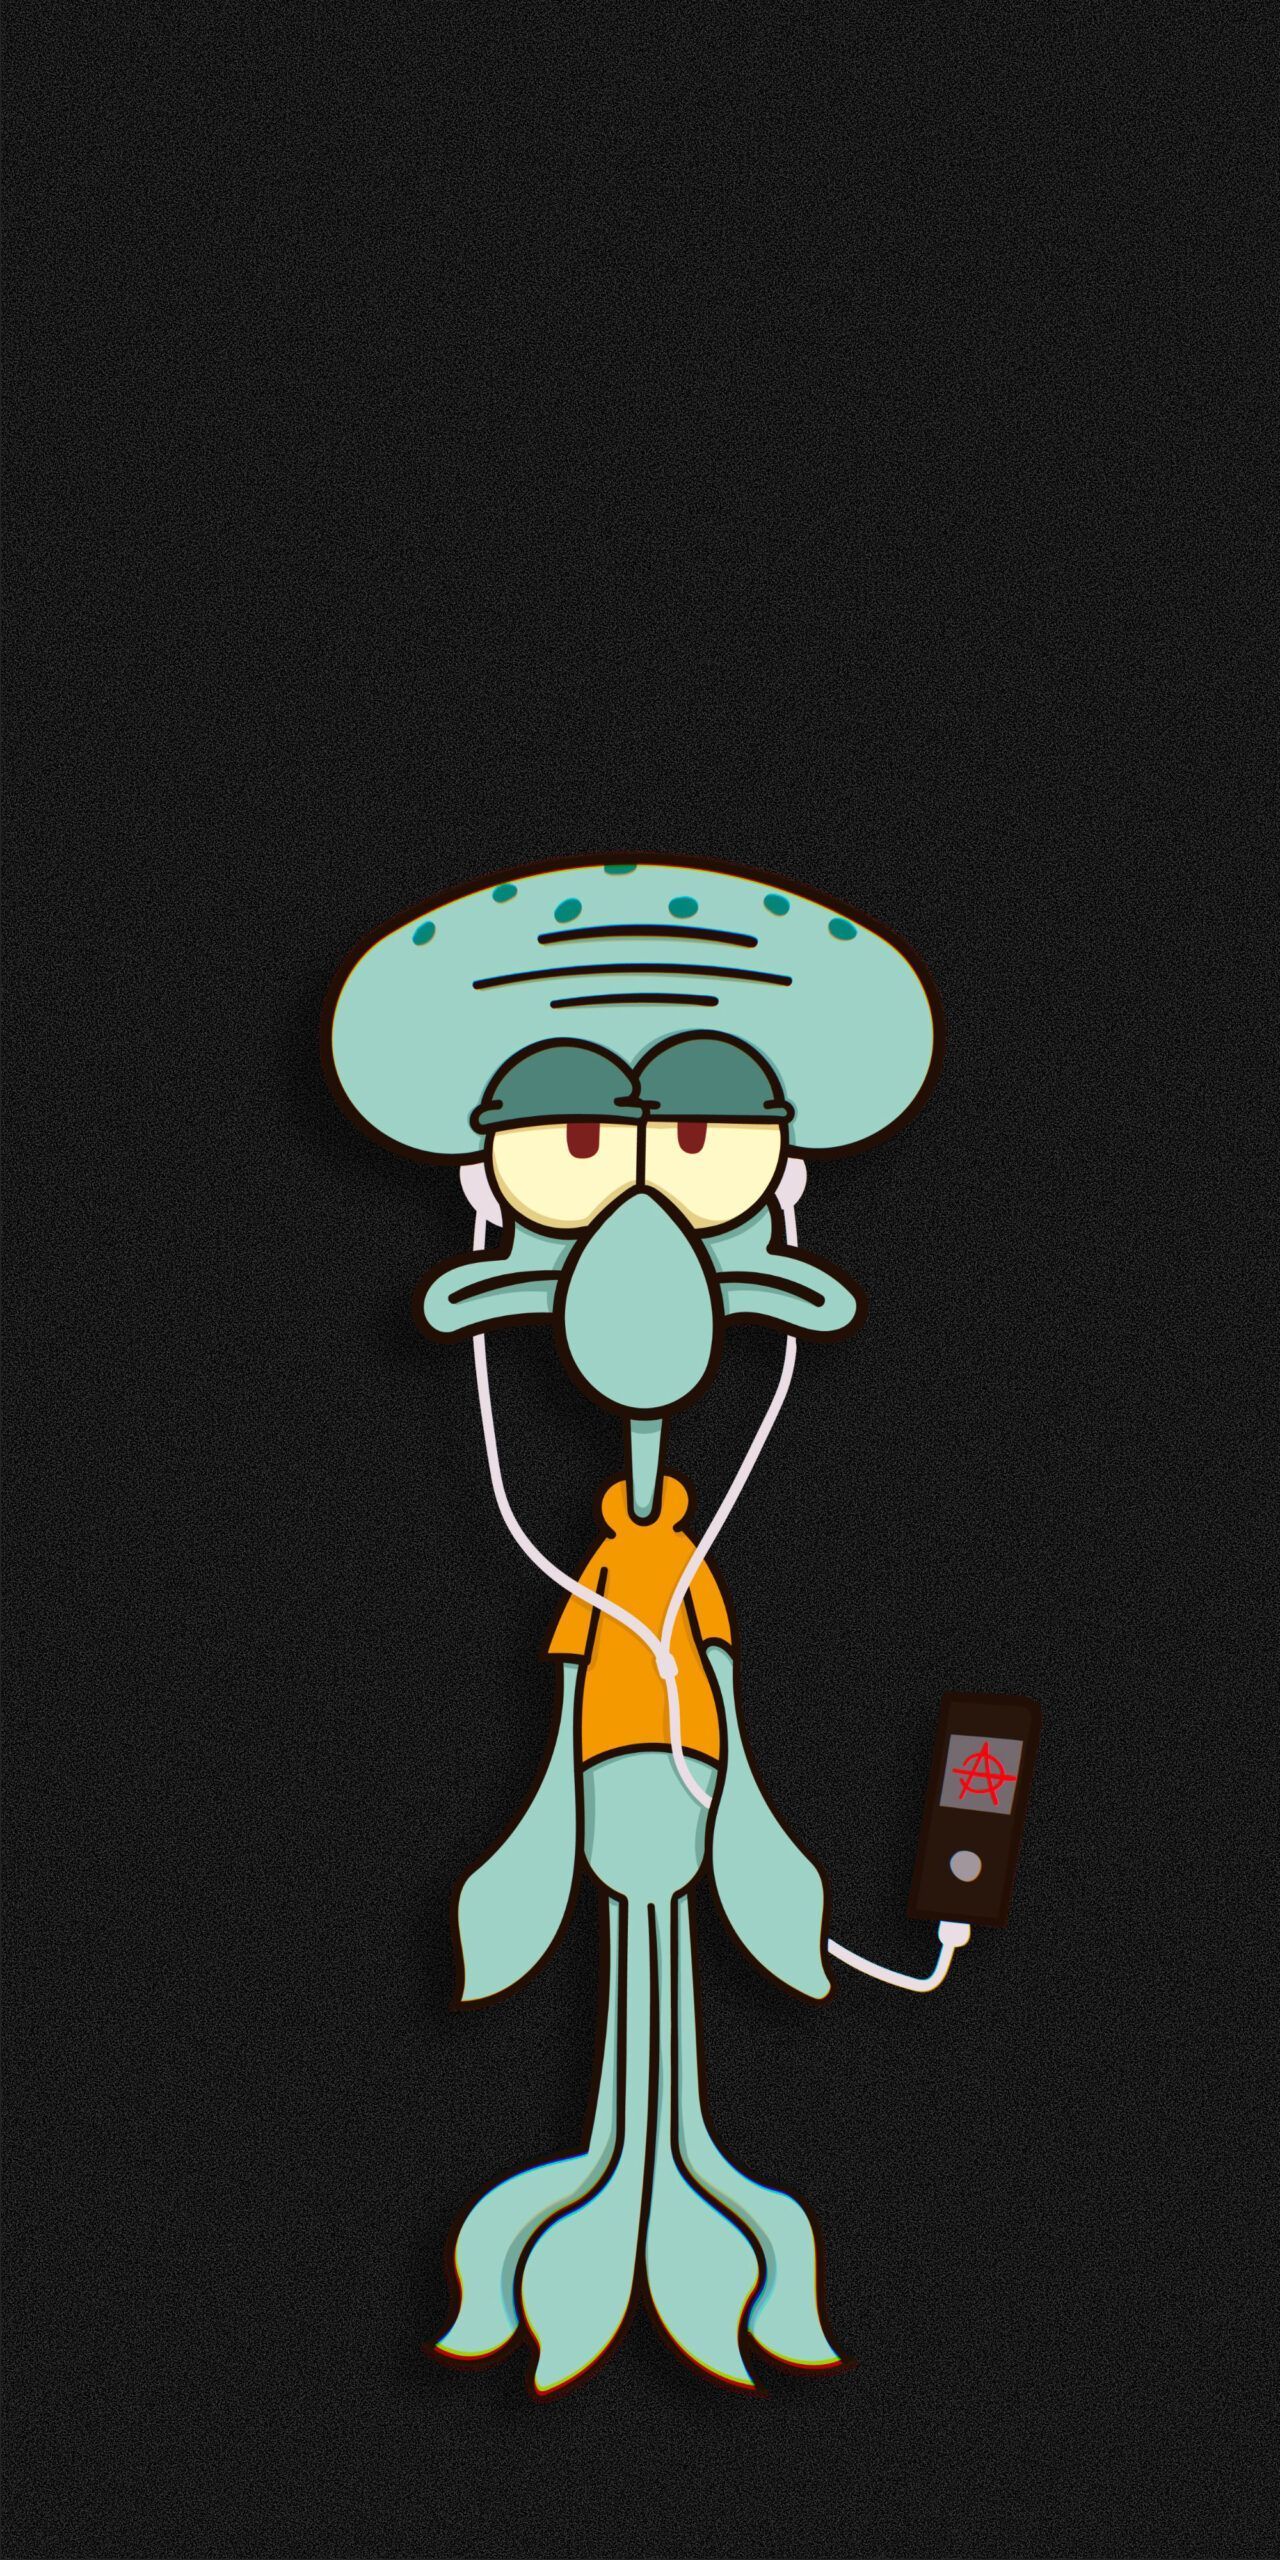 Squidward reading a book on a black background - Squidward